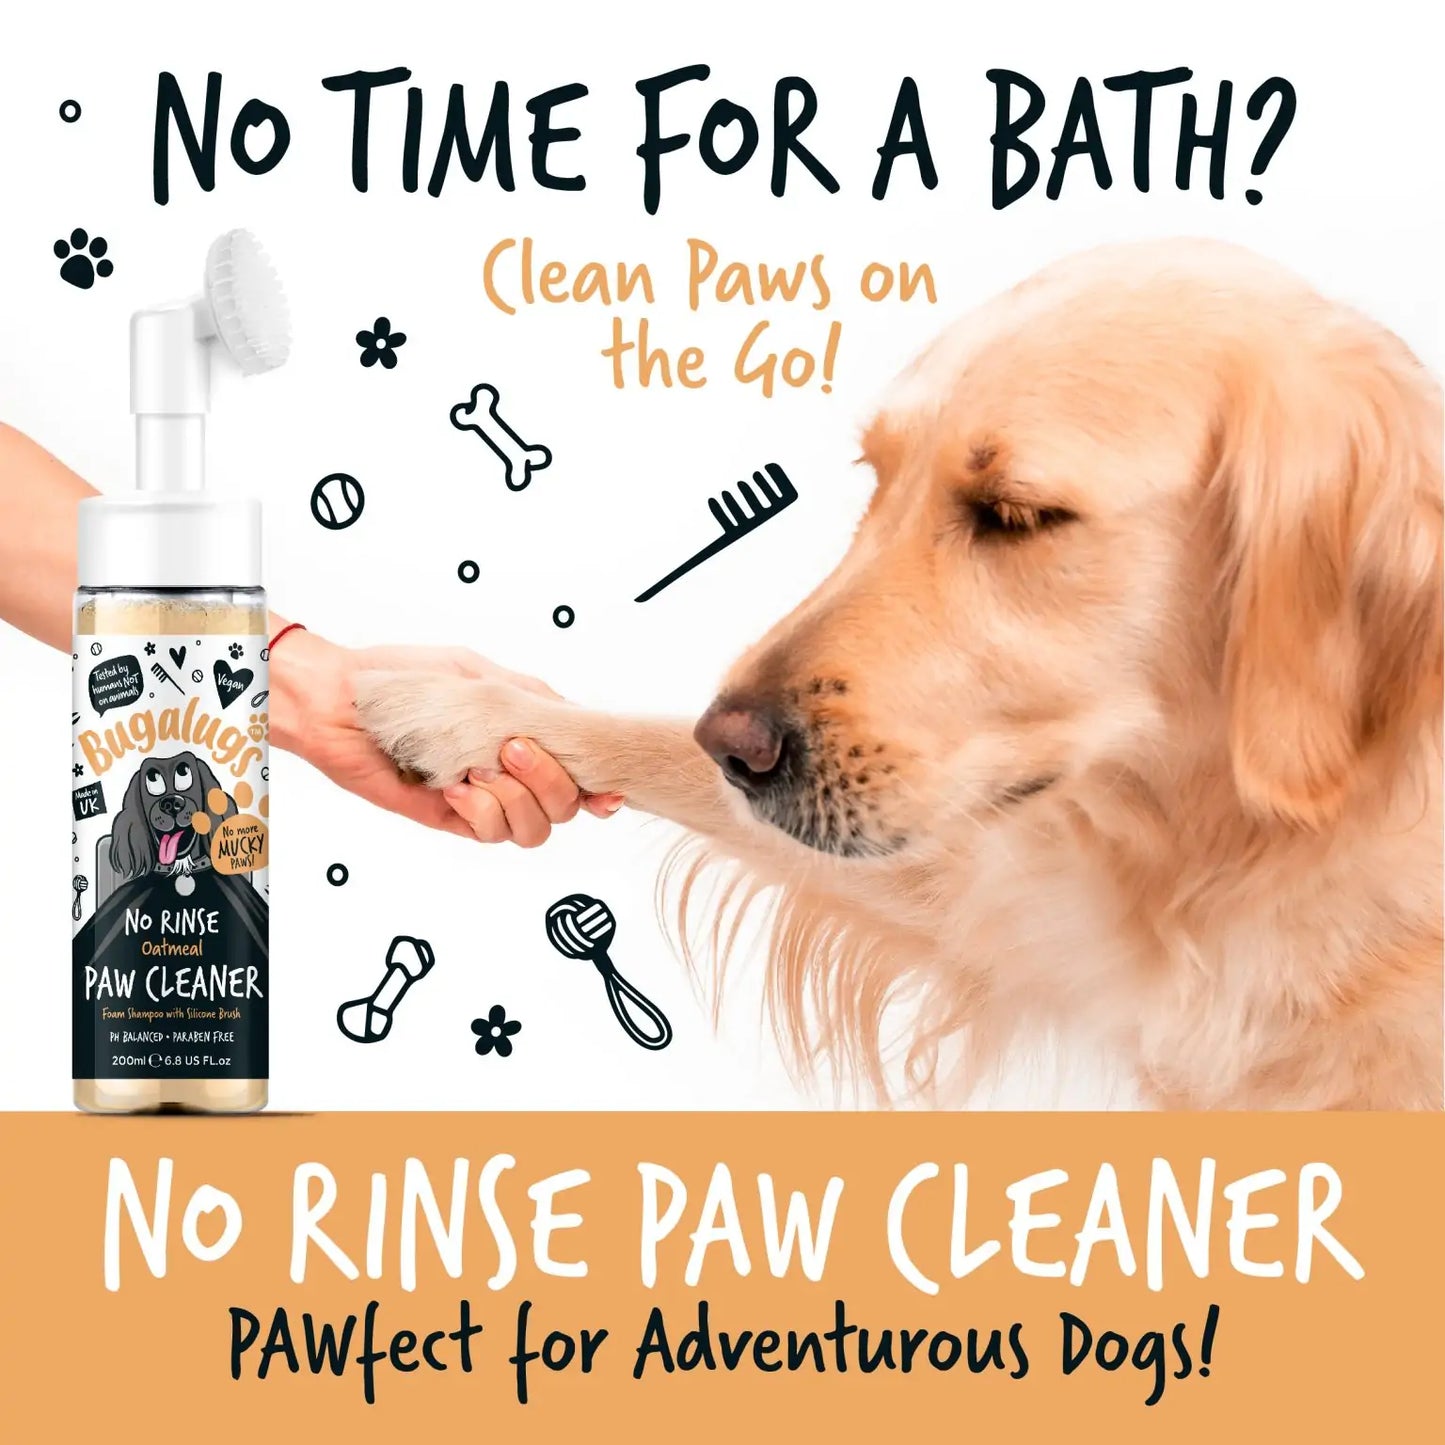 Bugalugs No Rinse Paw Cleaner Shampoo in Oatmeal